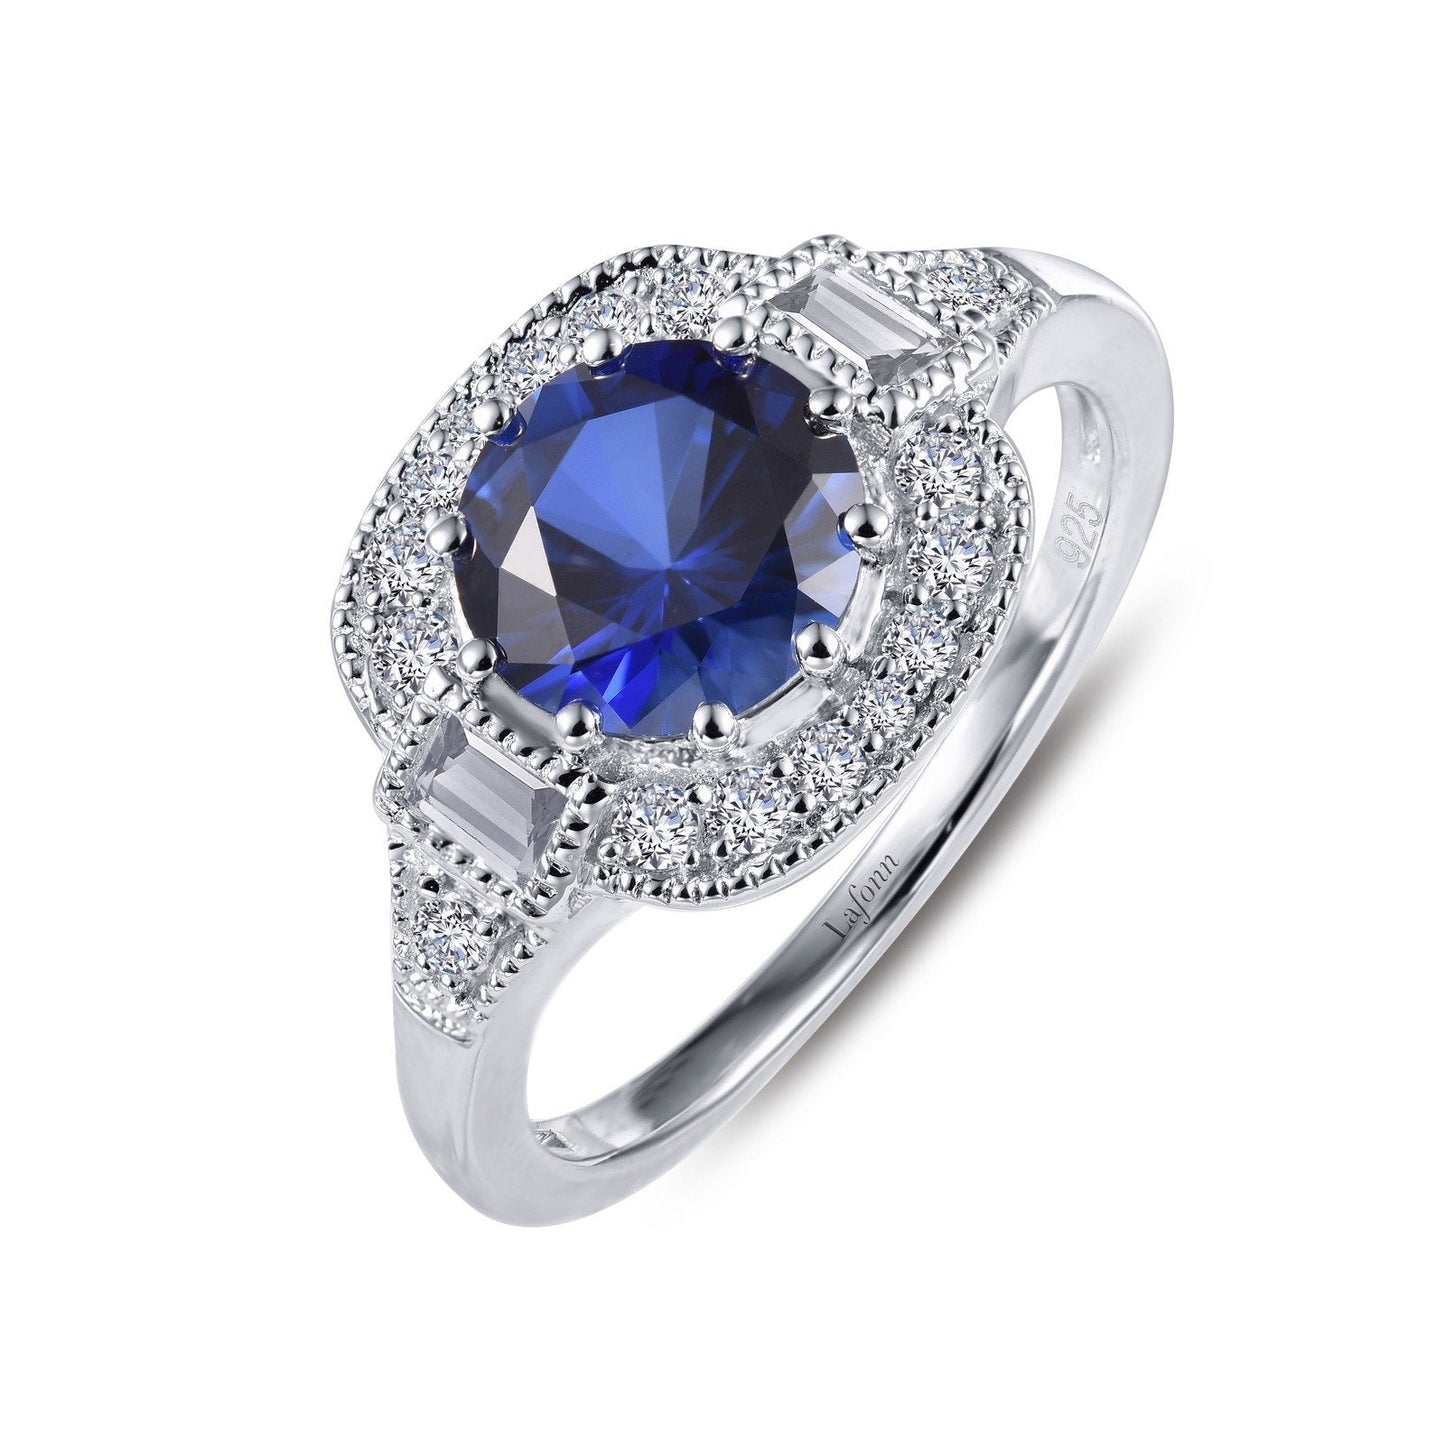 LaFonn Platinum Sapphire  7.00mm Round, Approx. 1.28 CTW RINGS Vintage Inspired Engagement Ring